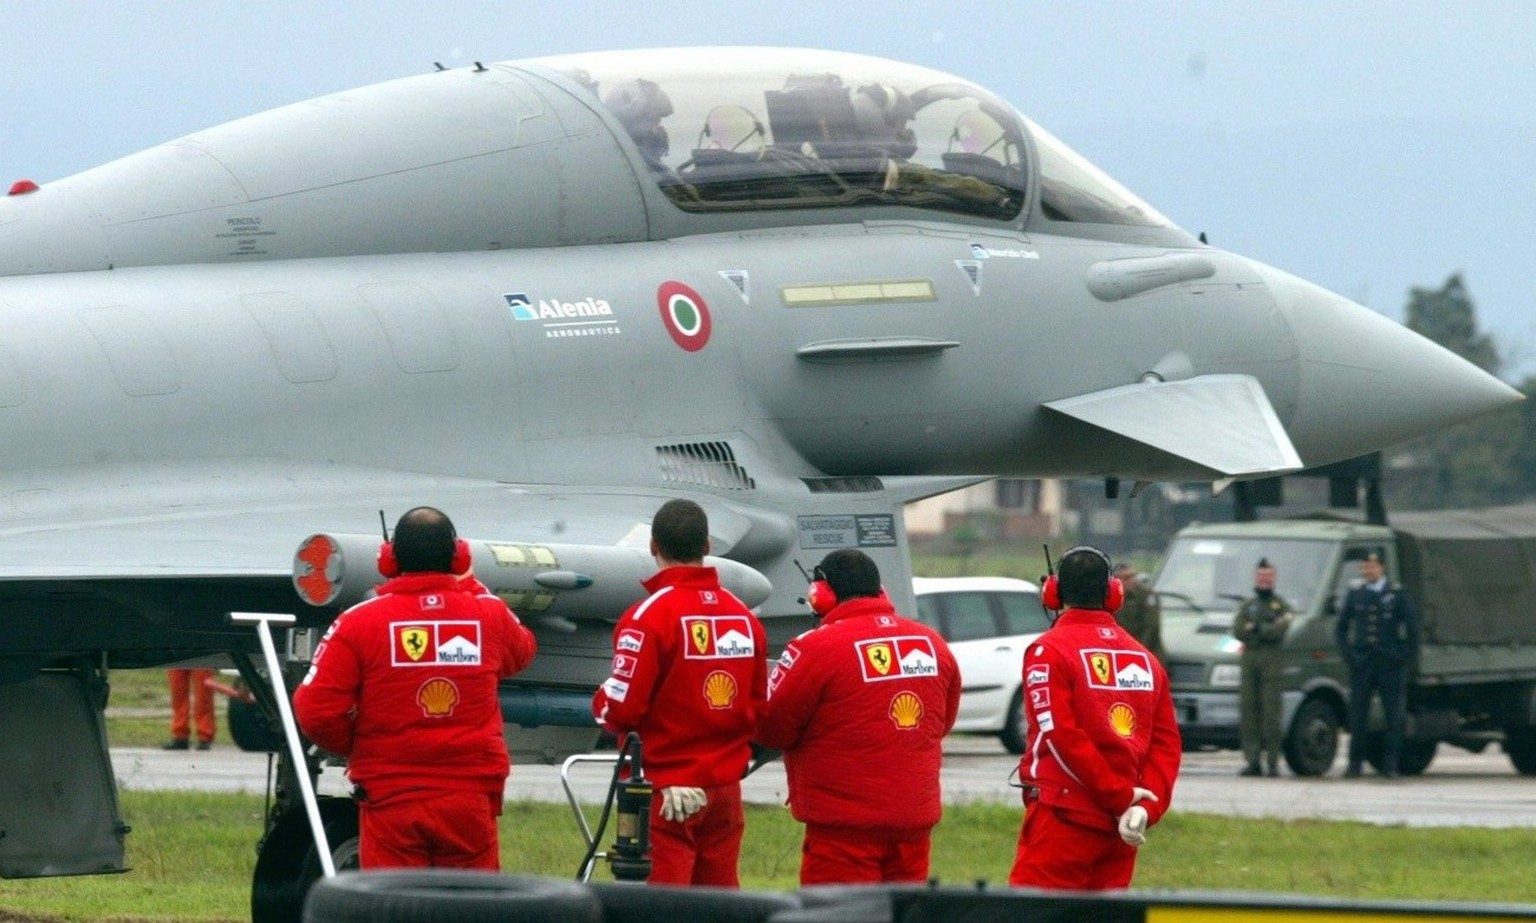 The Ferrari mechanics of German F1 driver Michael Schumacher inspect the Eurofighter jetplane prior to the race between the jet and Michael Schumacher in his Ferrari, Thursday 11 December 2003, at the ...